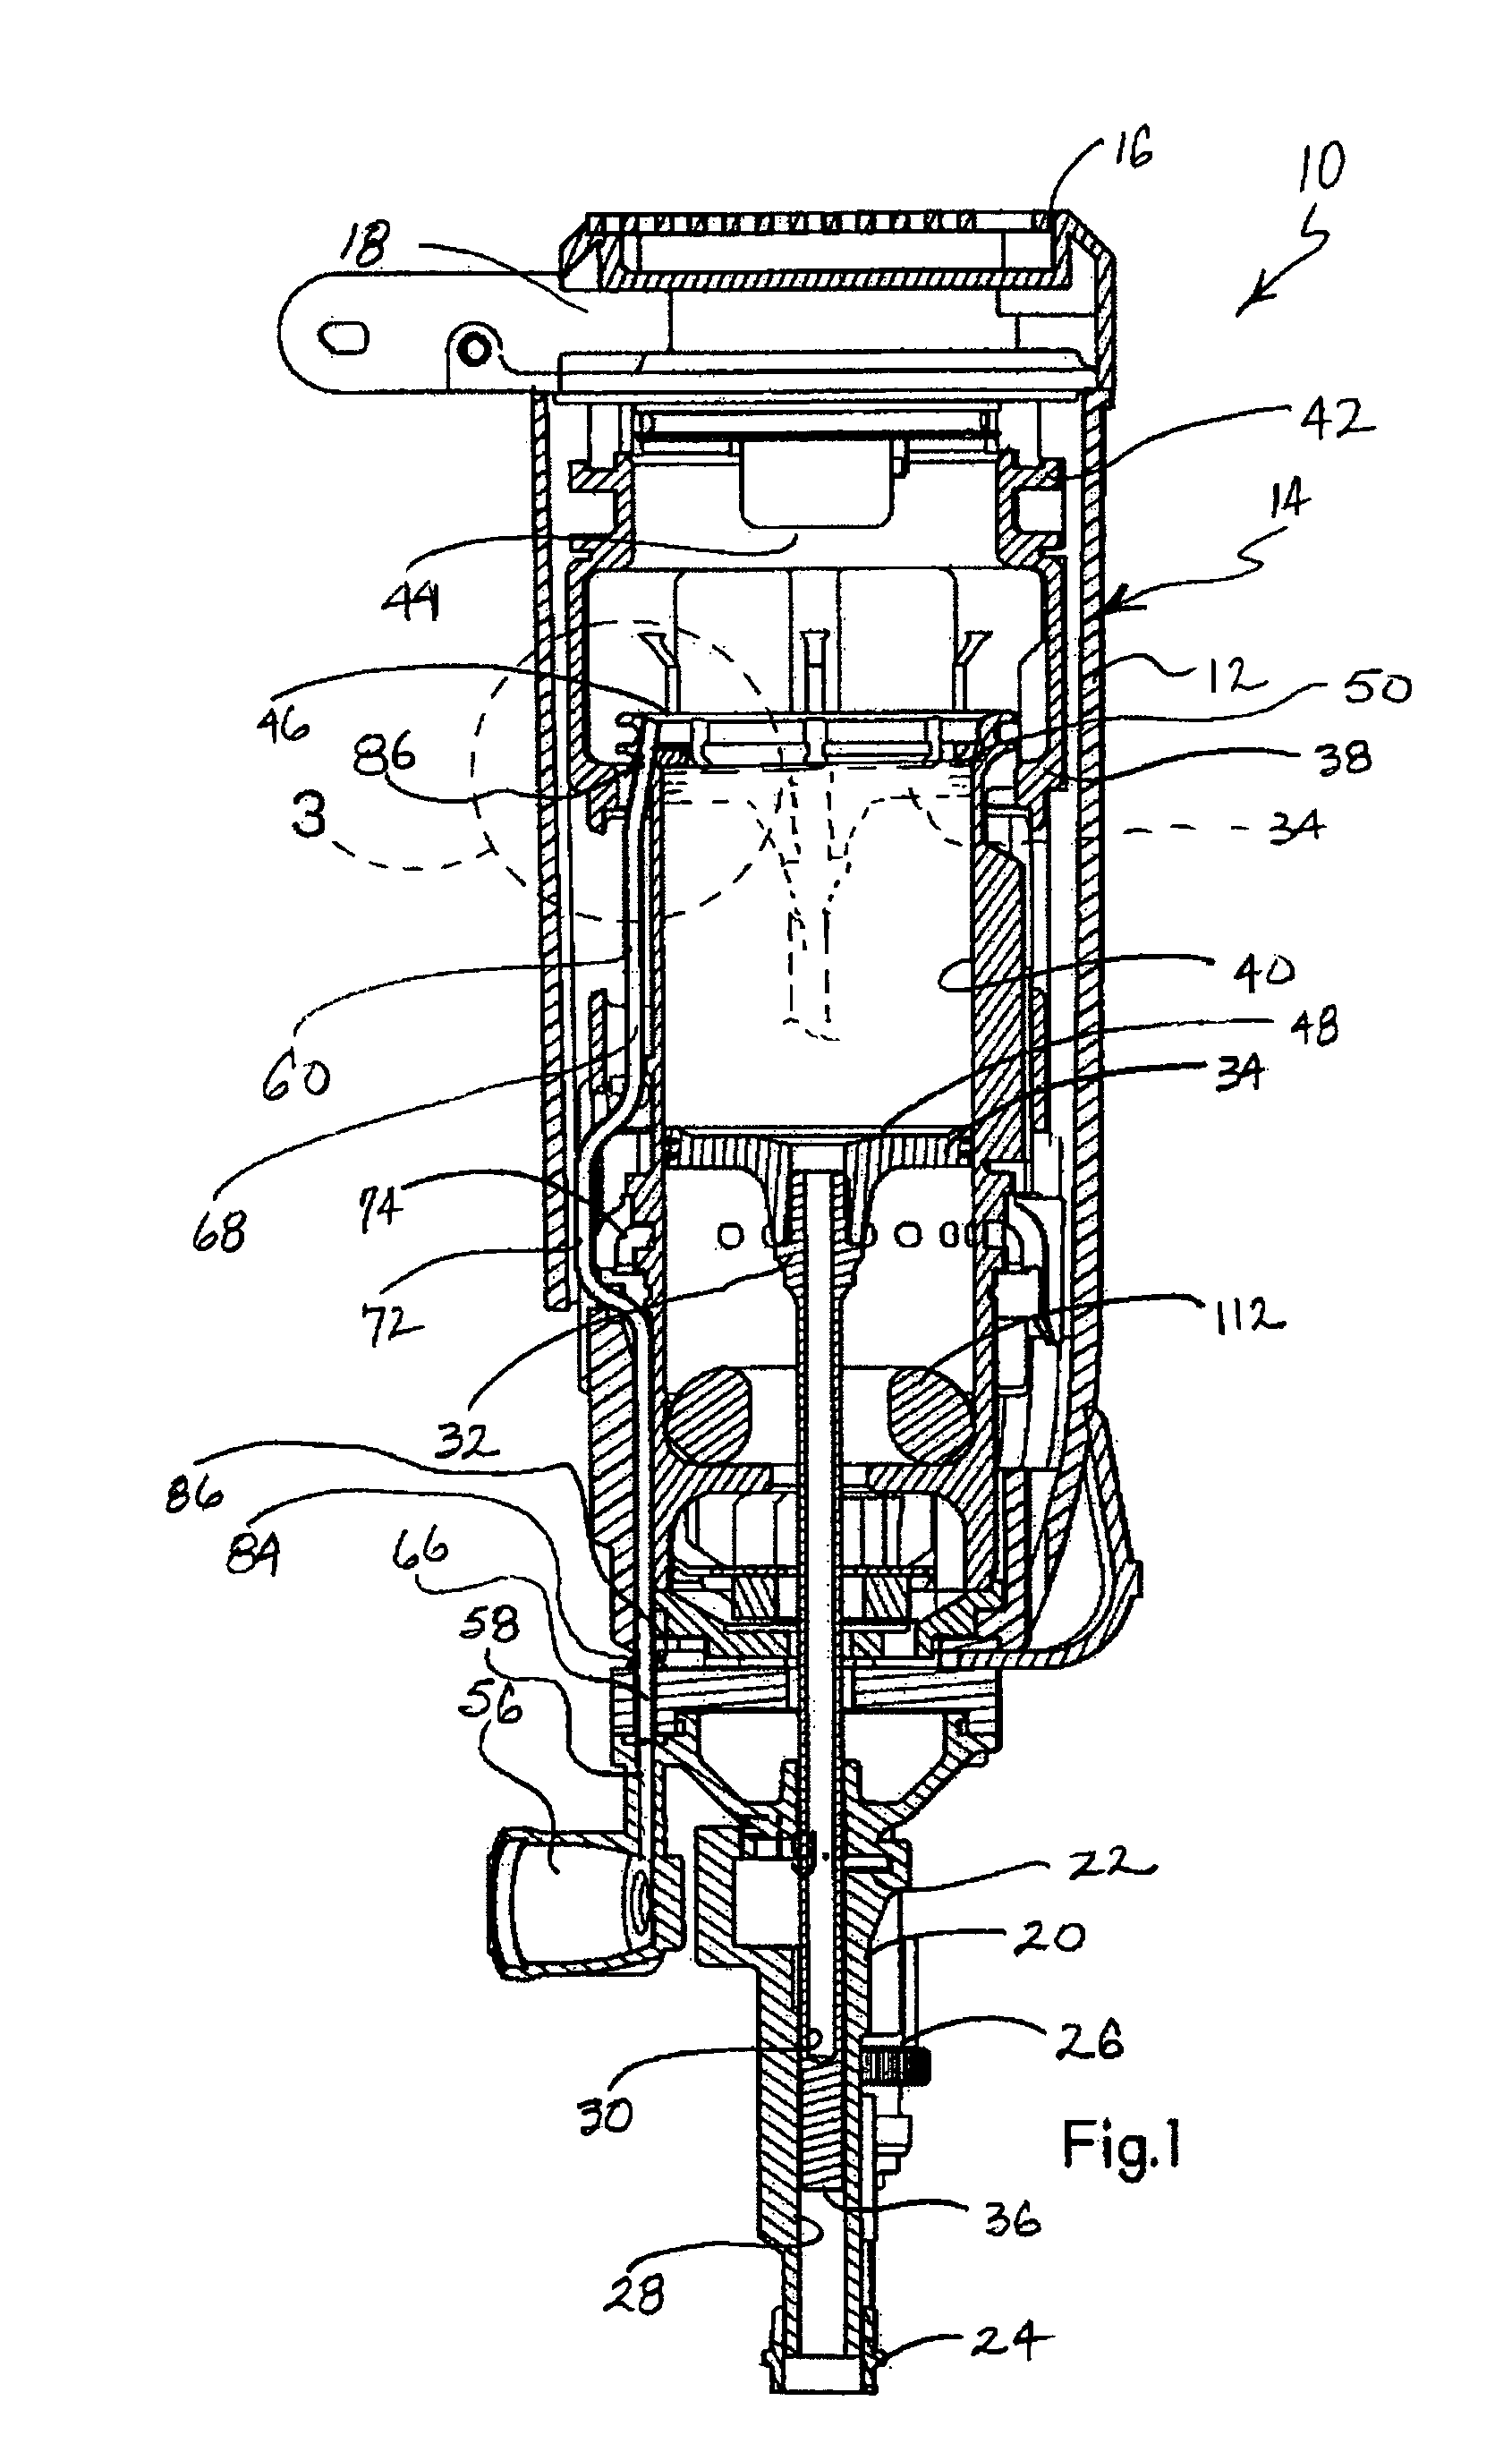 Gas driven actuation feed tube for combustion powered fastener-driving tool